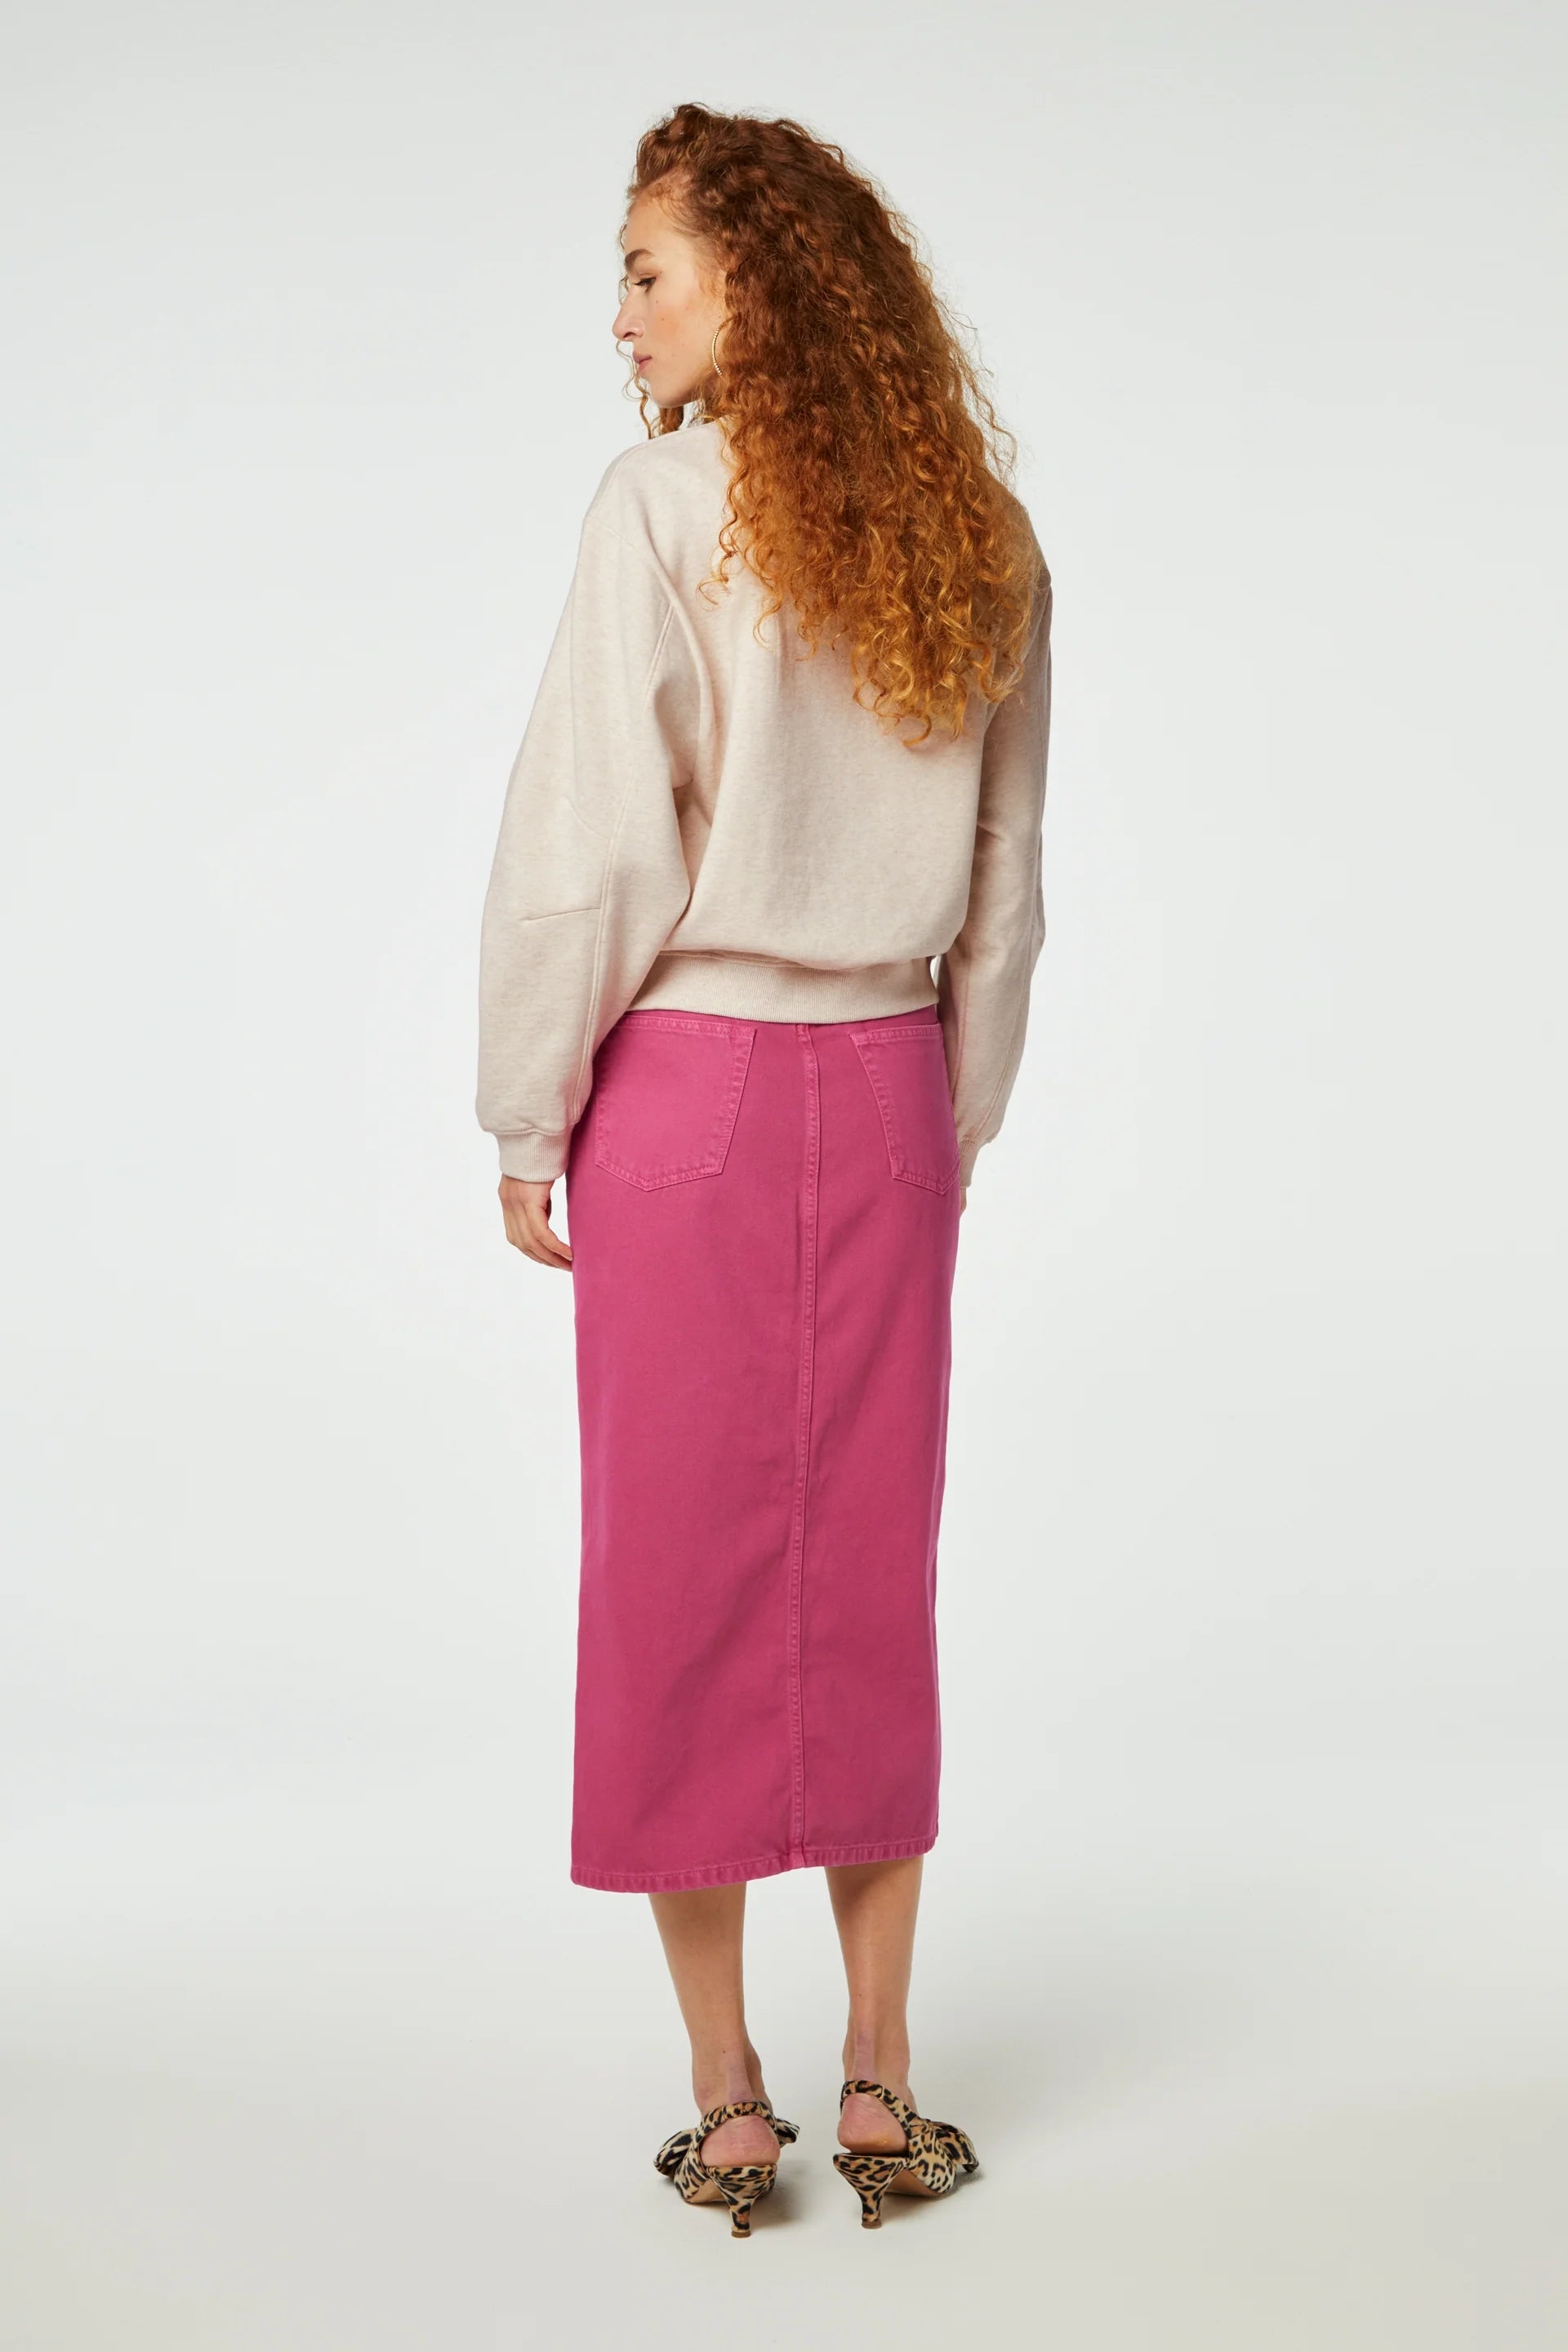 Woman standing with her back to the camera wearing a beige sweatshirt and a Carlyne skirt in hot pink from Fabienne Chapot, paired with patterned heeled sandals.